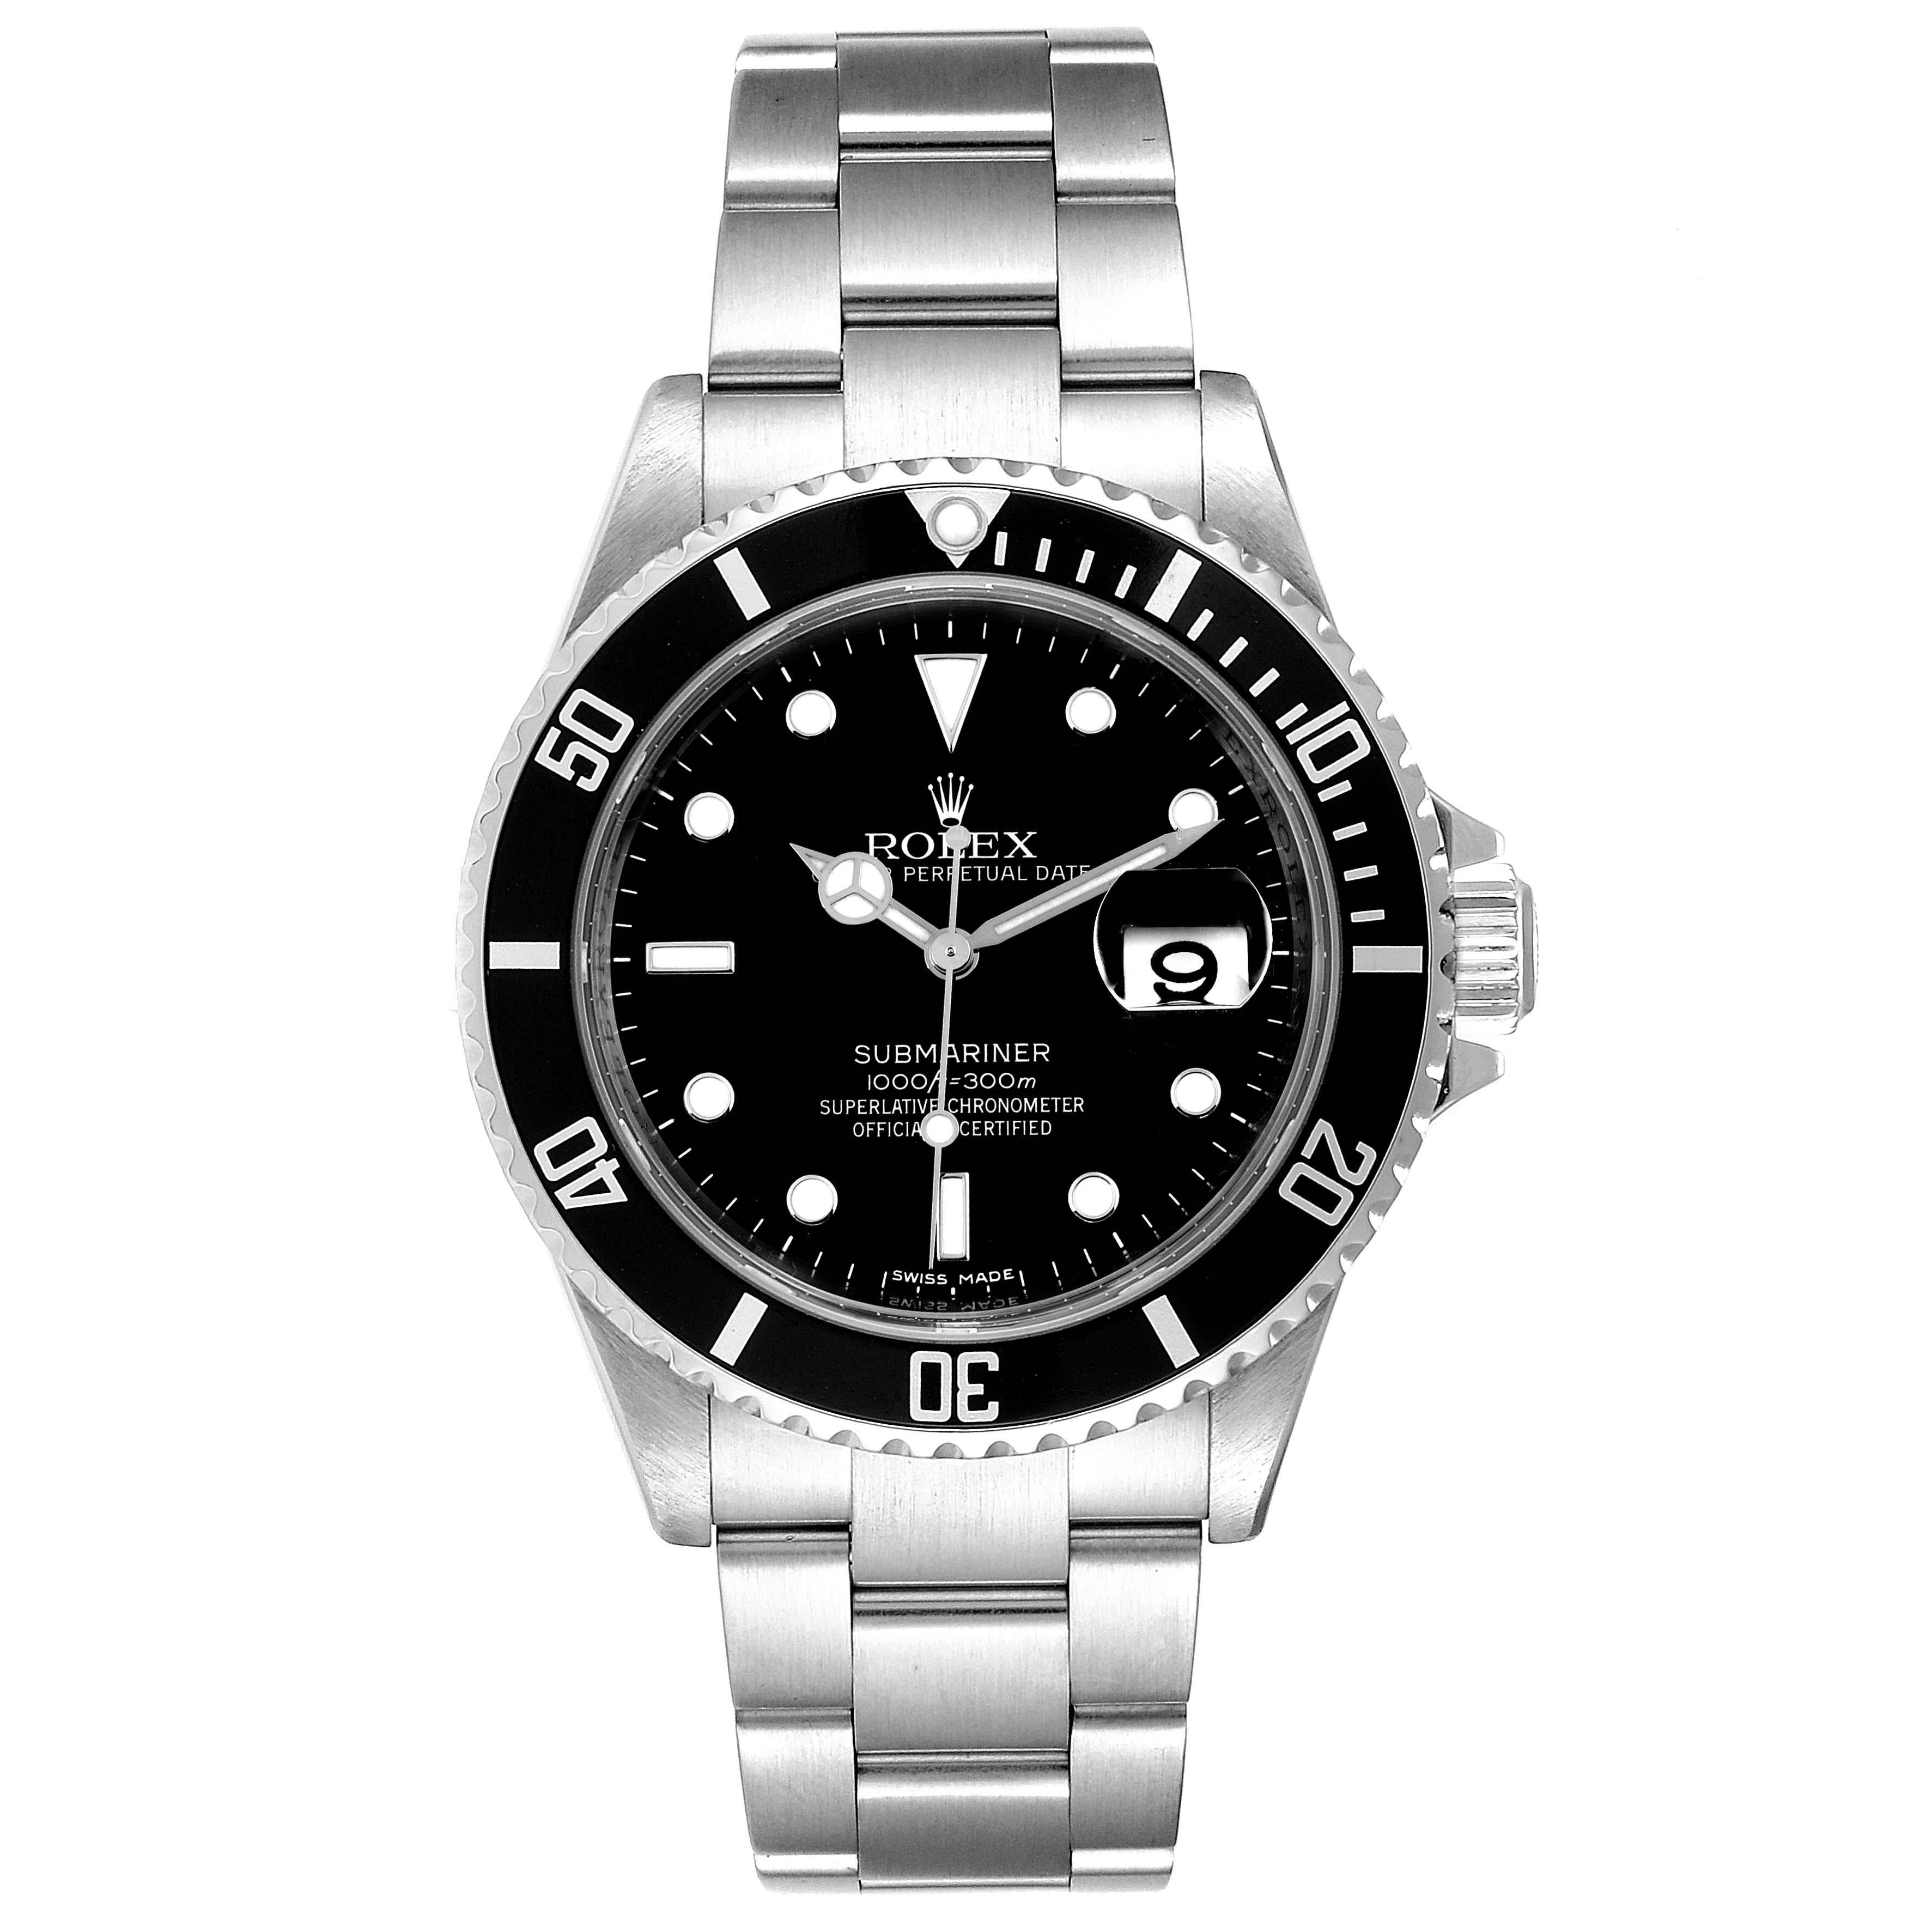 Rolex Submariner Date 40mm Stainless Steel Mens Watch 16610 Box Card. Officially certified chronometer self-winding movement. Stainless steel case 40.0 mm in diameter. Rolex logo on a crown. Special time-lapse unidirectional rotating bezel. Scratch